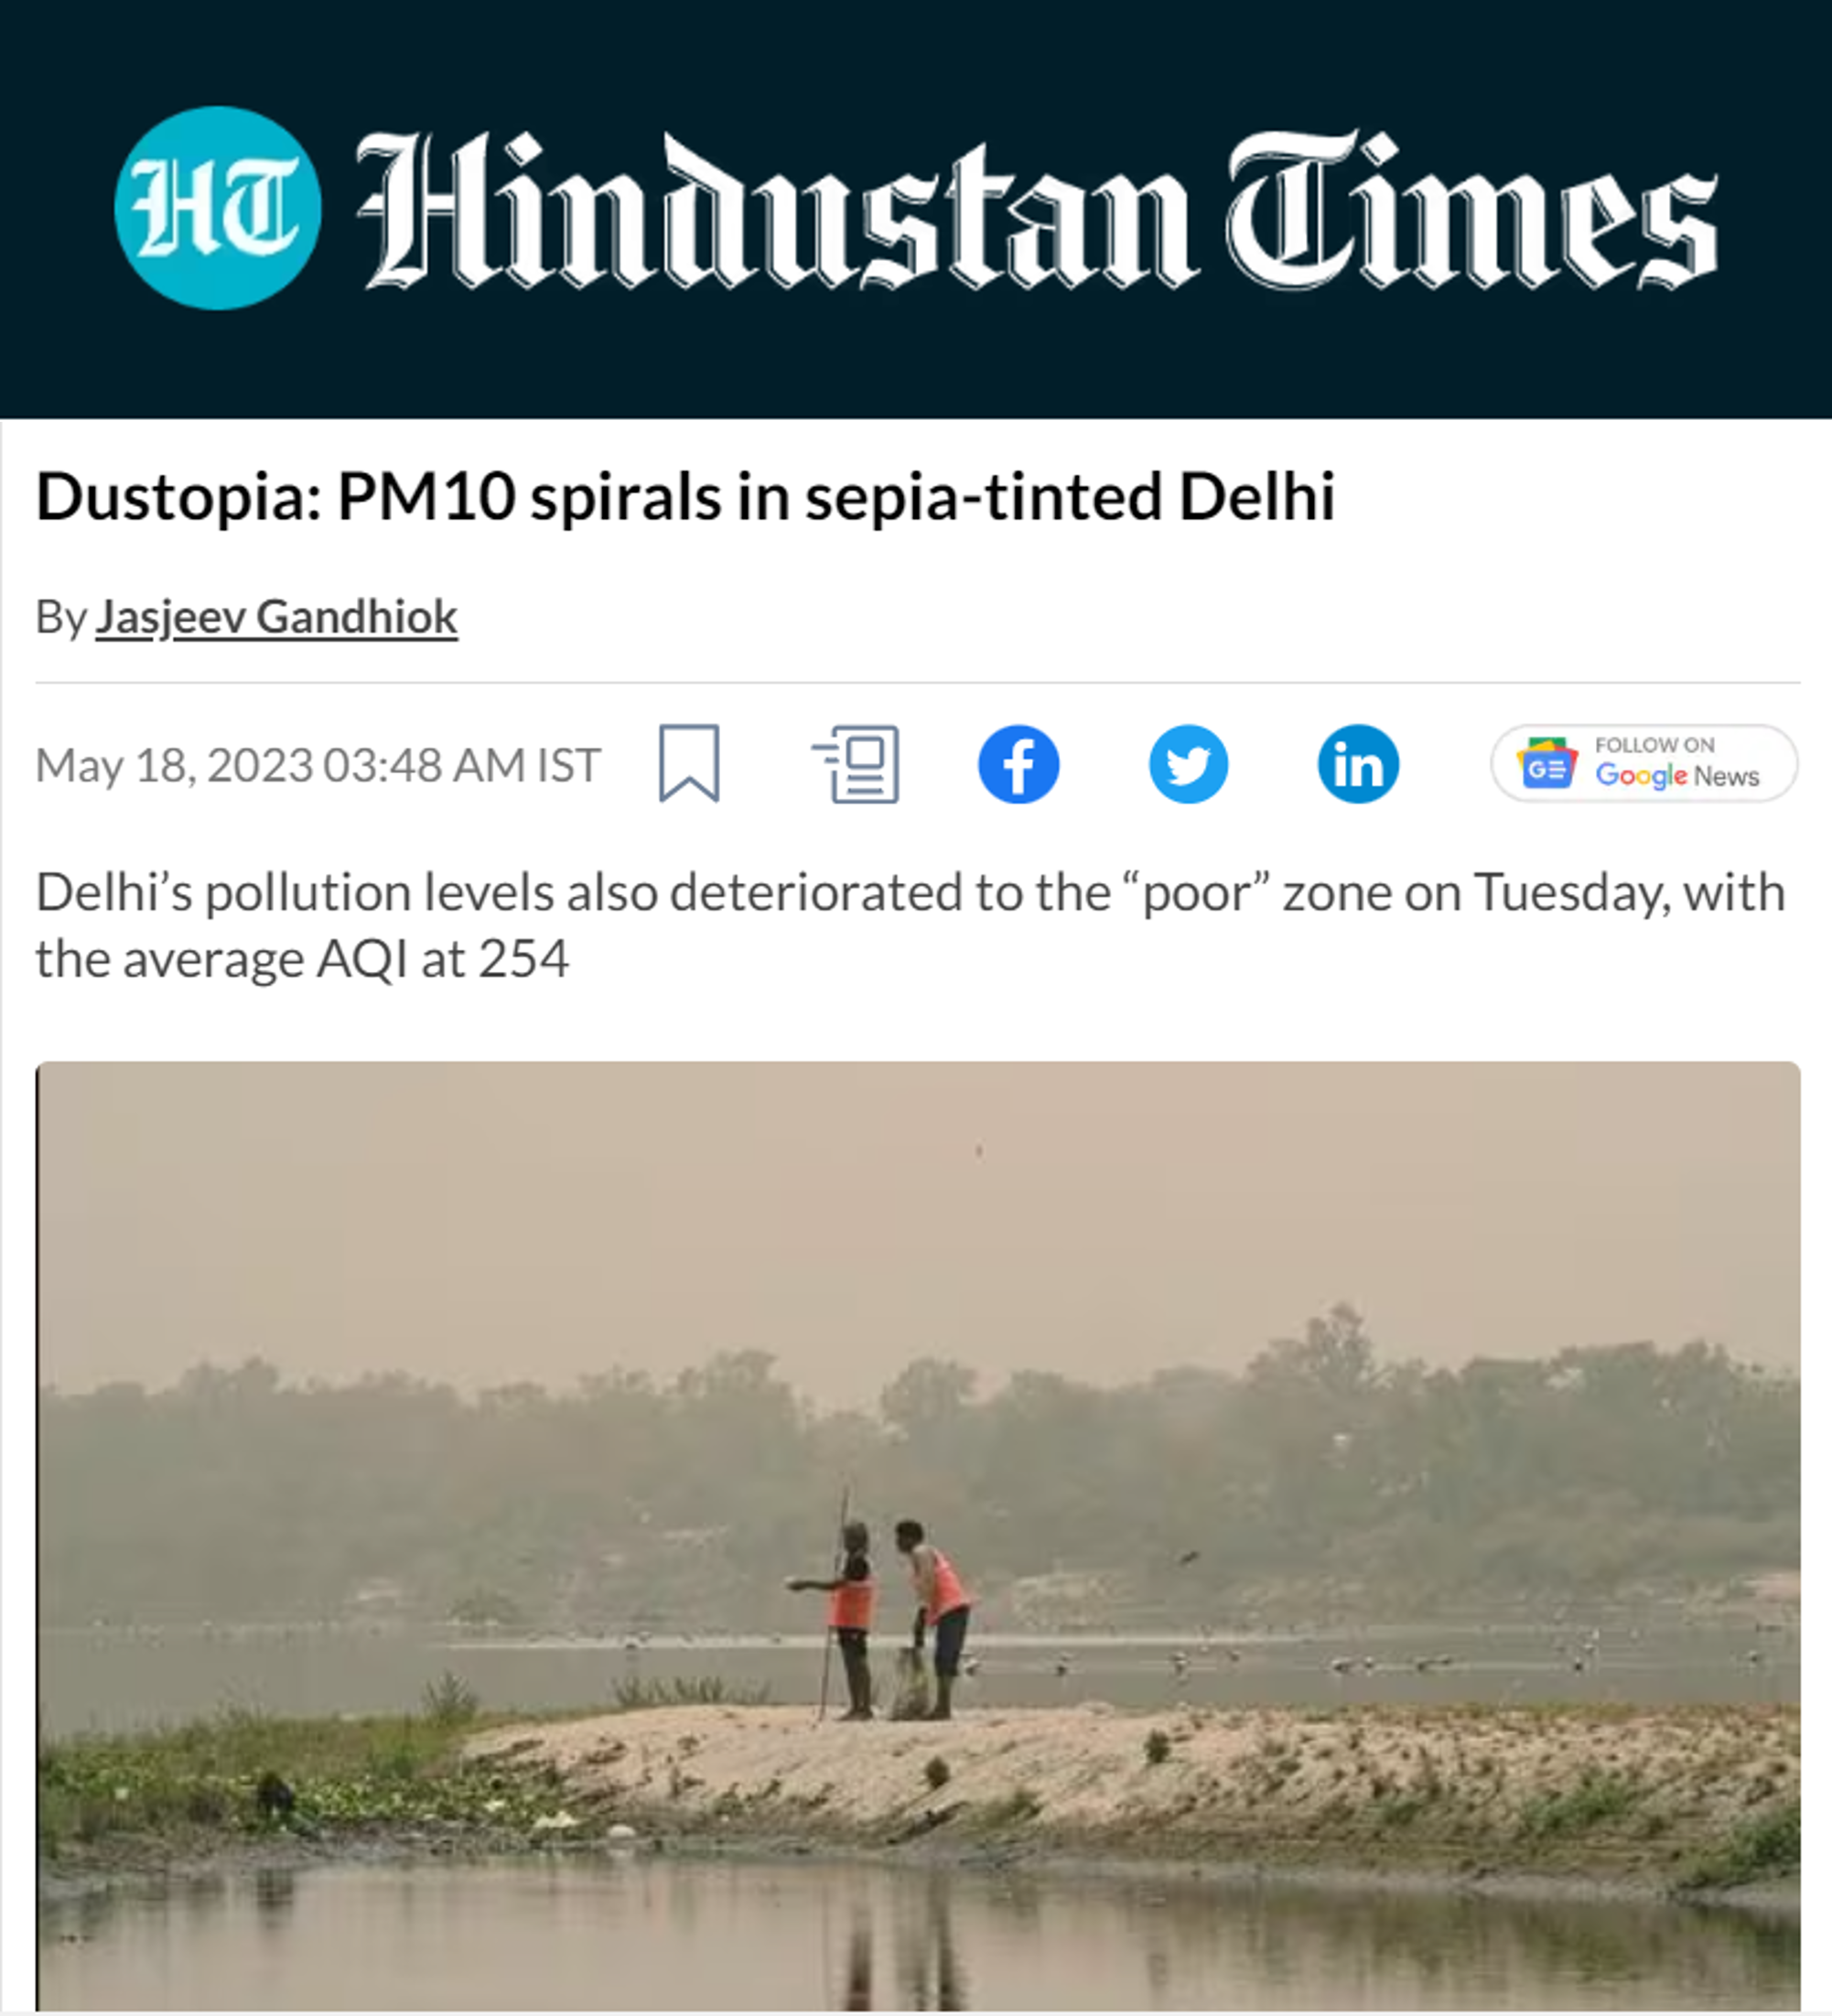 Dr Vignesh Prabhu quoted by Hindustan Times on high dust levels in Delhi’s air